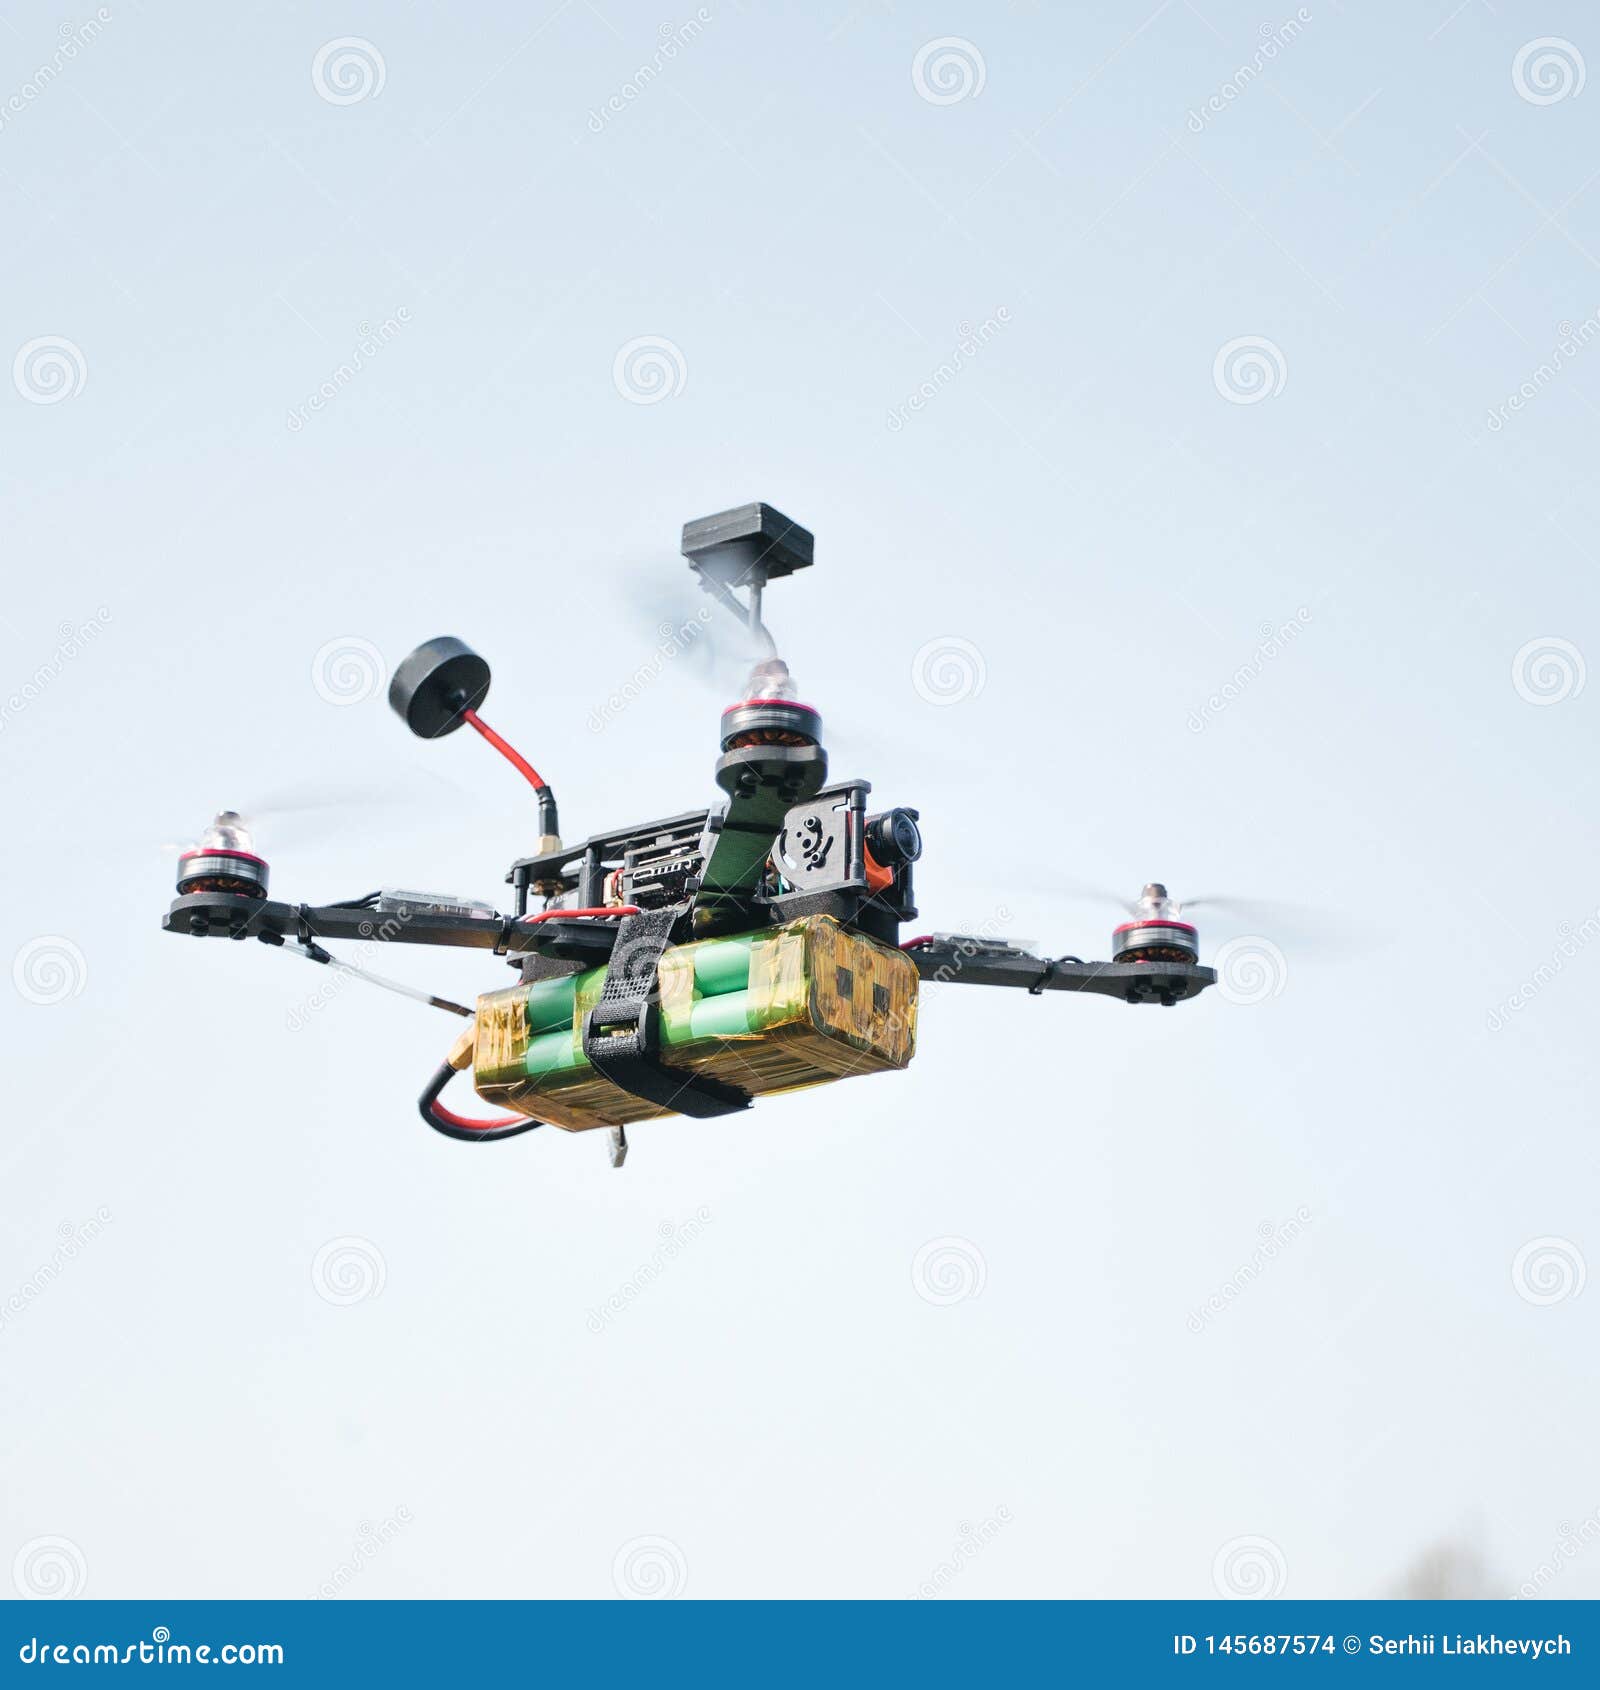 FPV drone ready to fly stock photo. Image of aircraft - 145687574